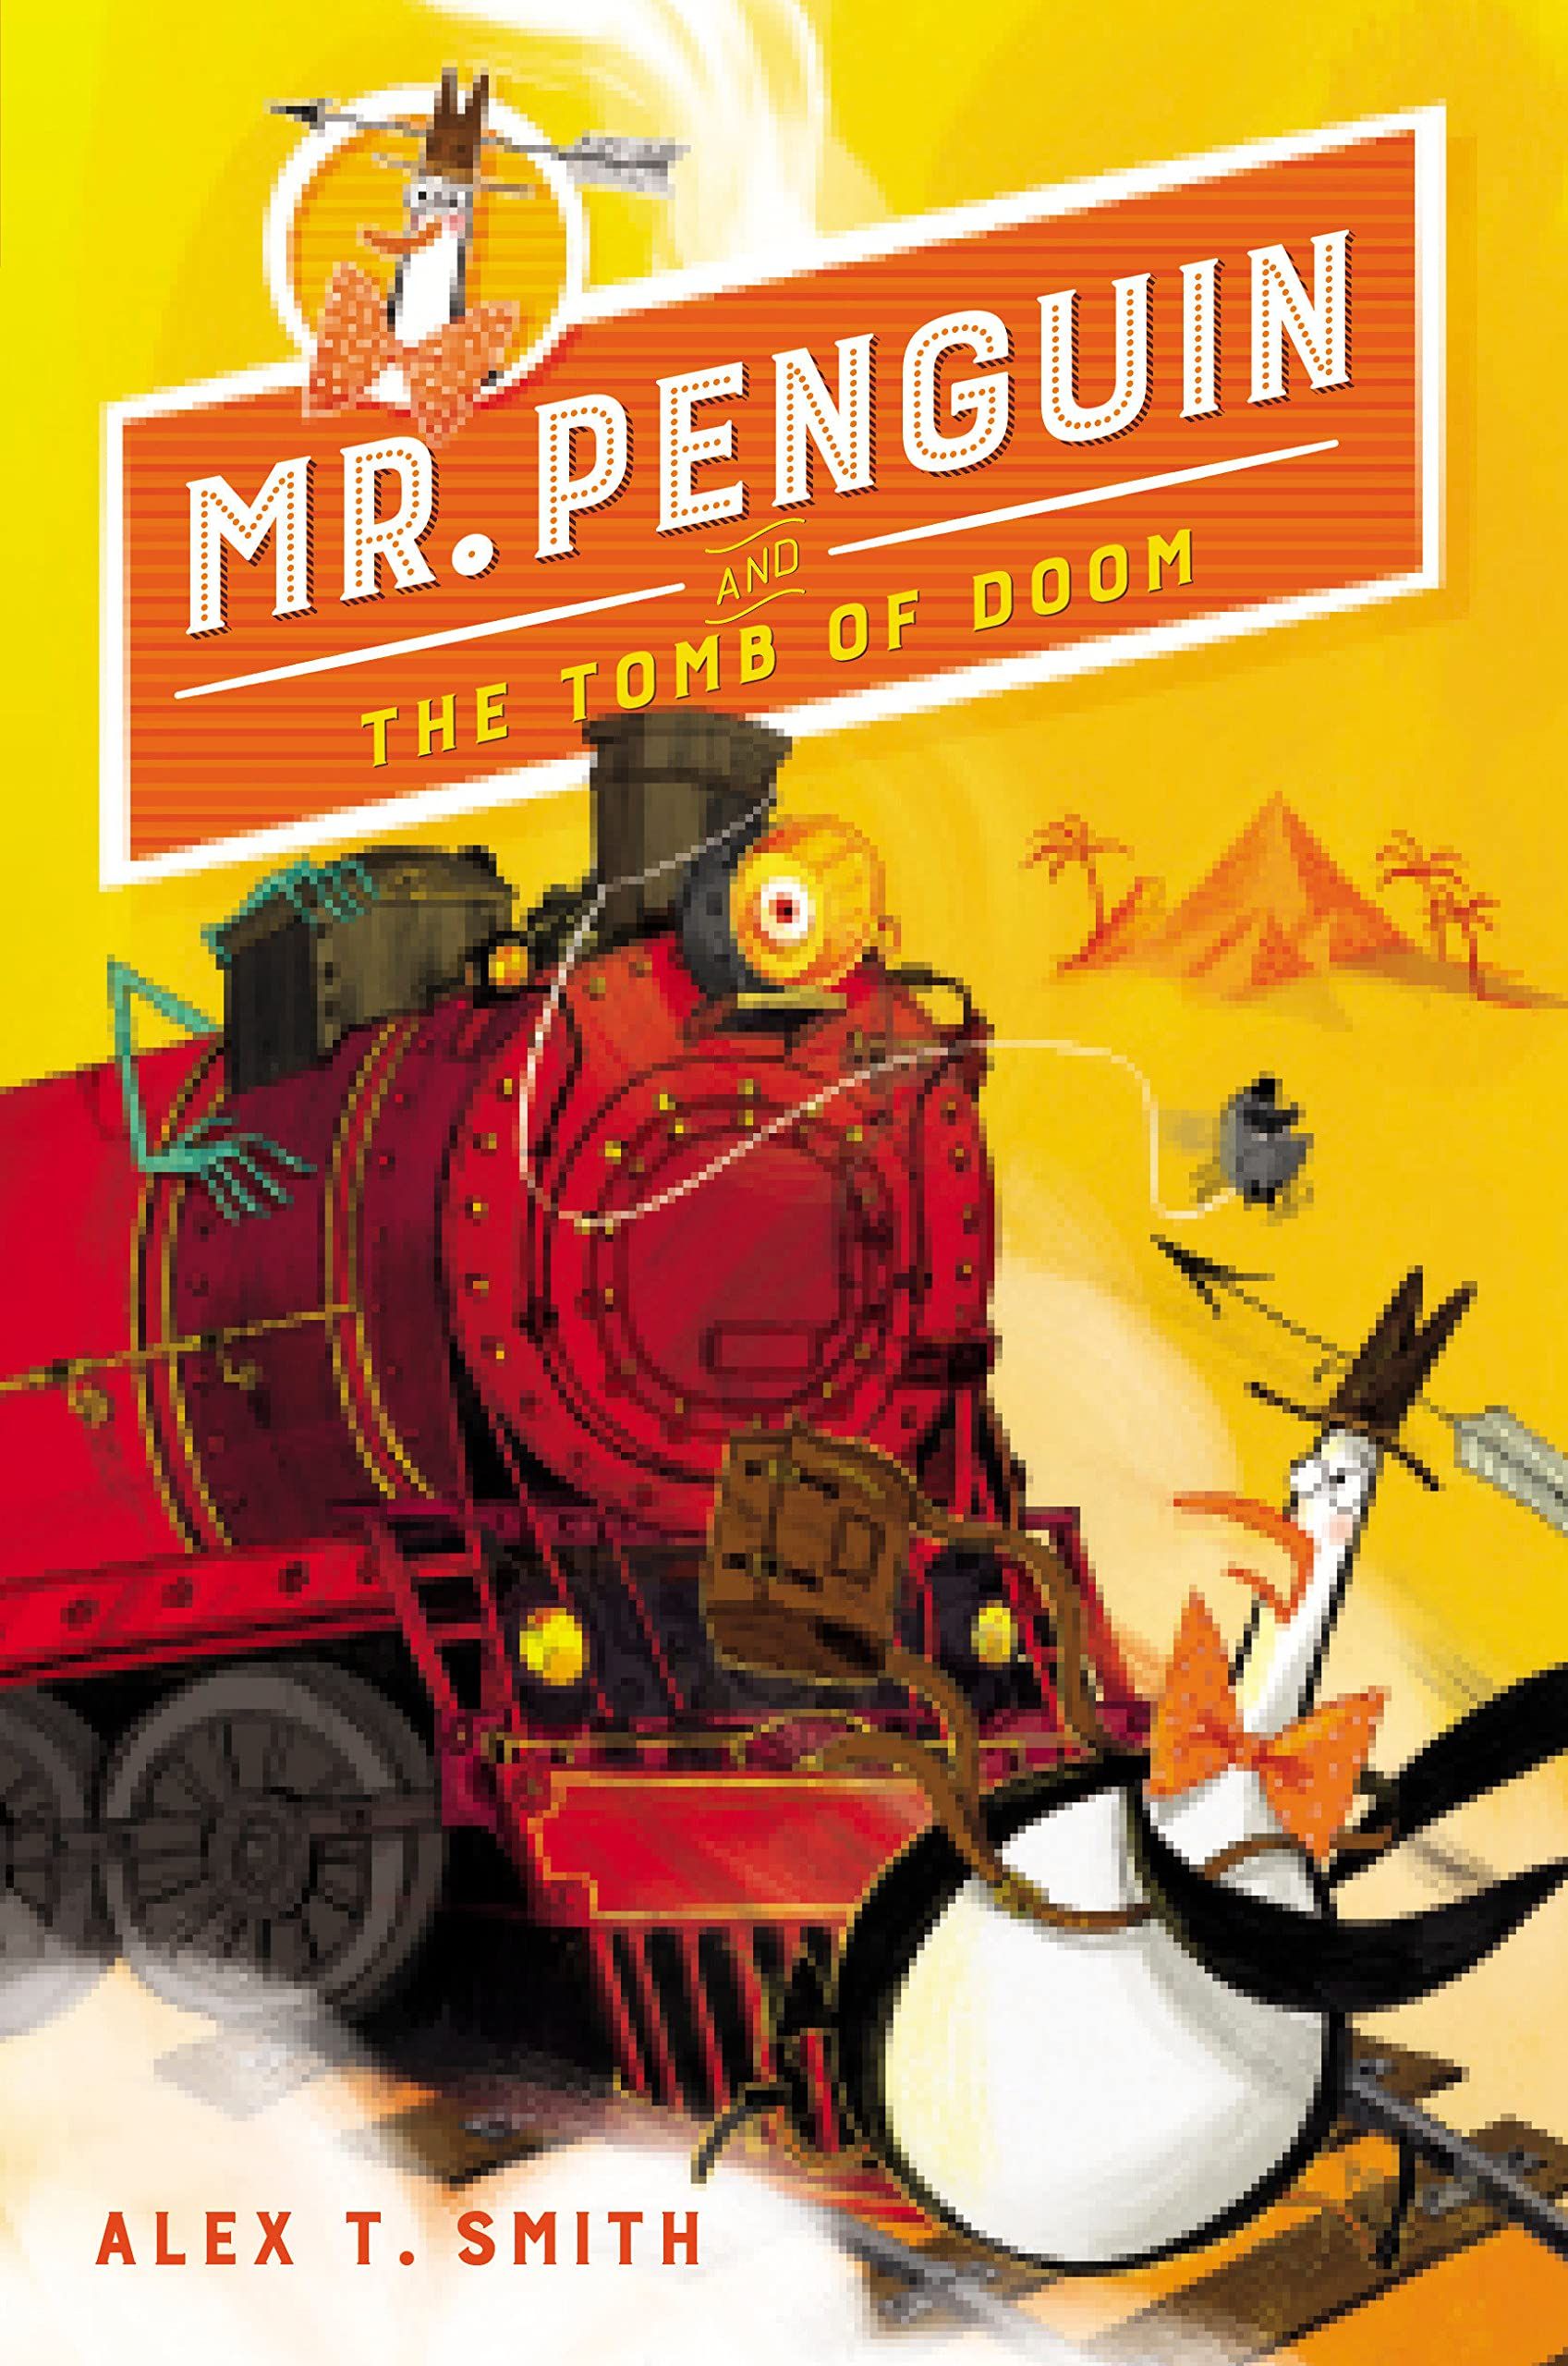 cover of mr penguin and the tomb of doom